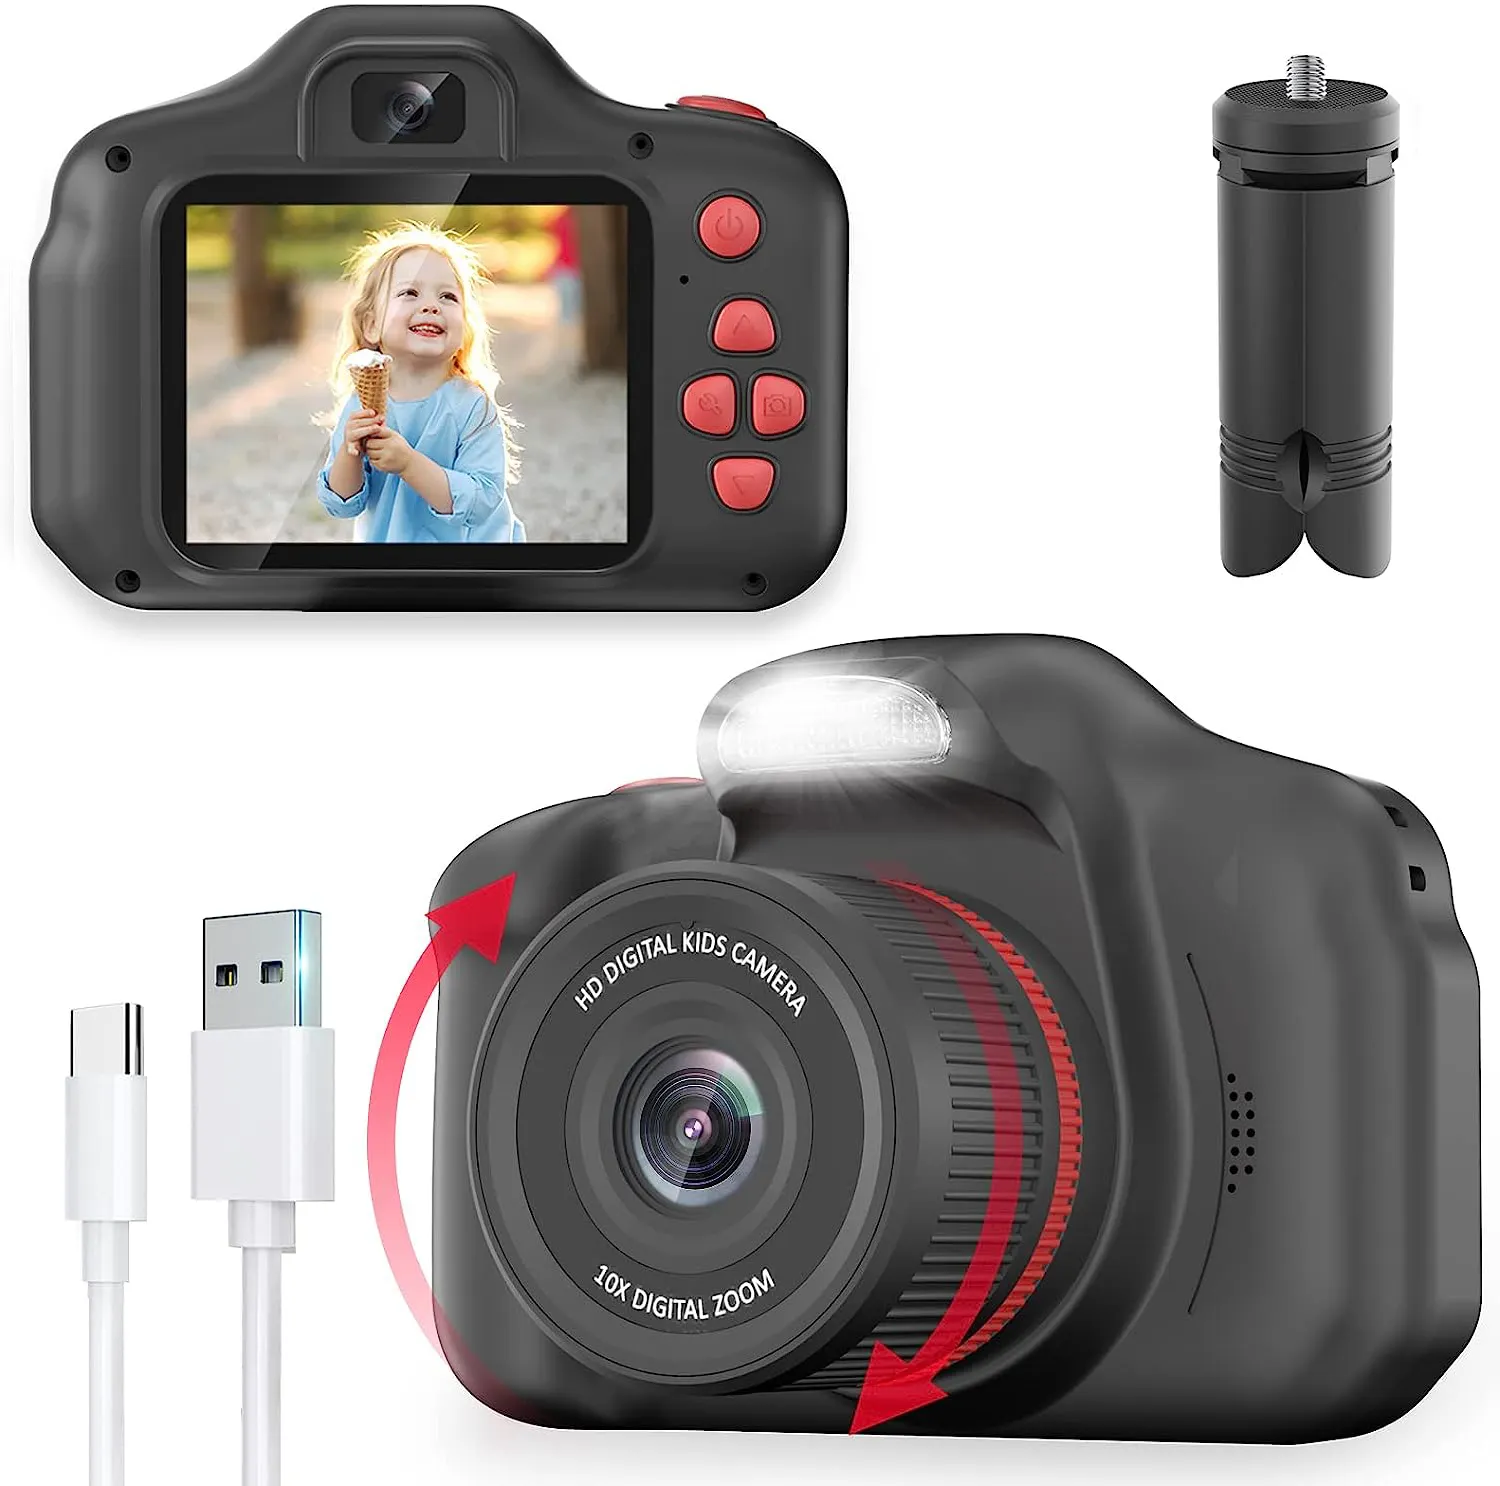 NEW X2 Pro Kids Digital Camera with LED and Tripod Innovative Toddler SLR Digital Camera for Ages 3-12 Year Old Children